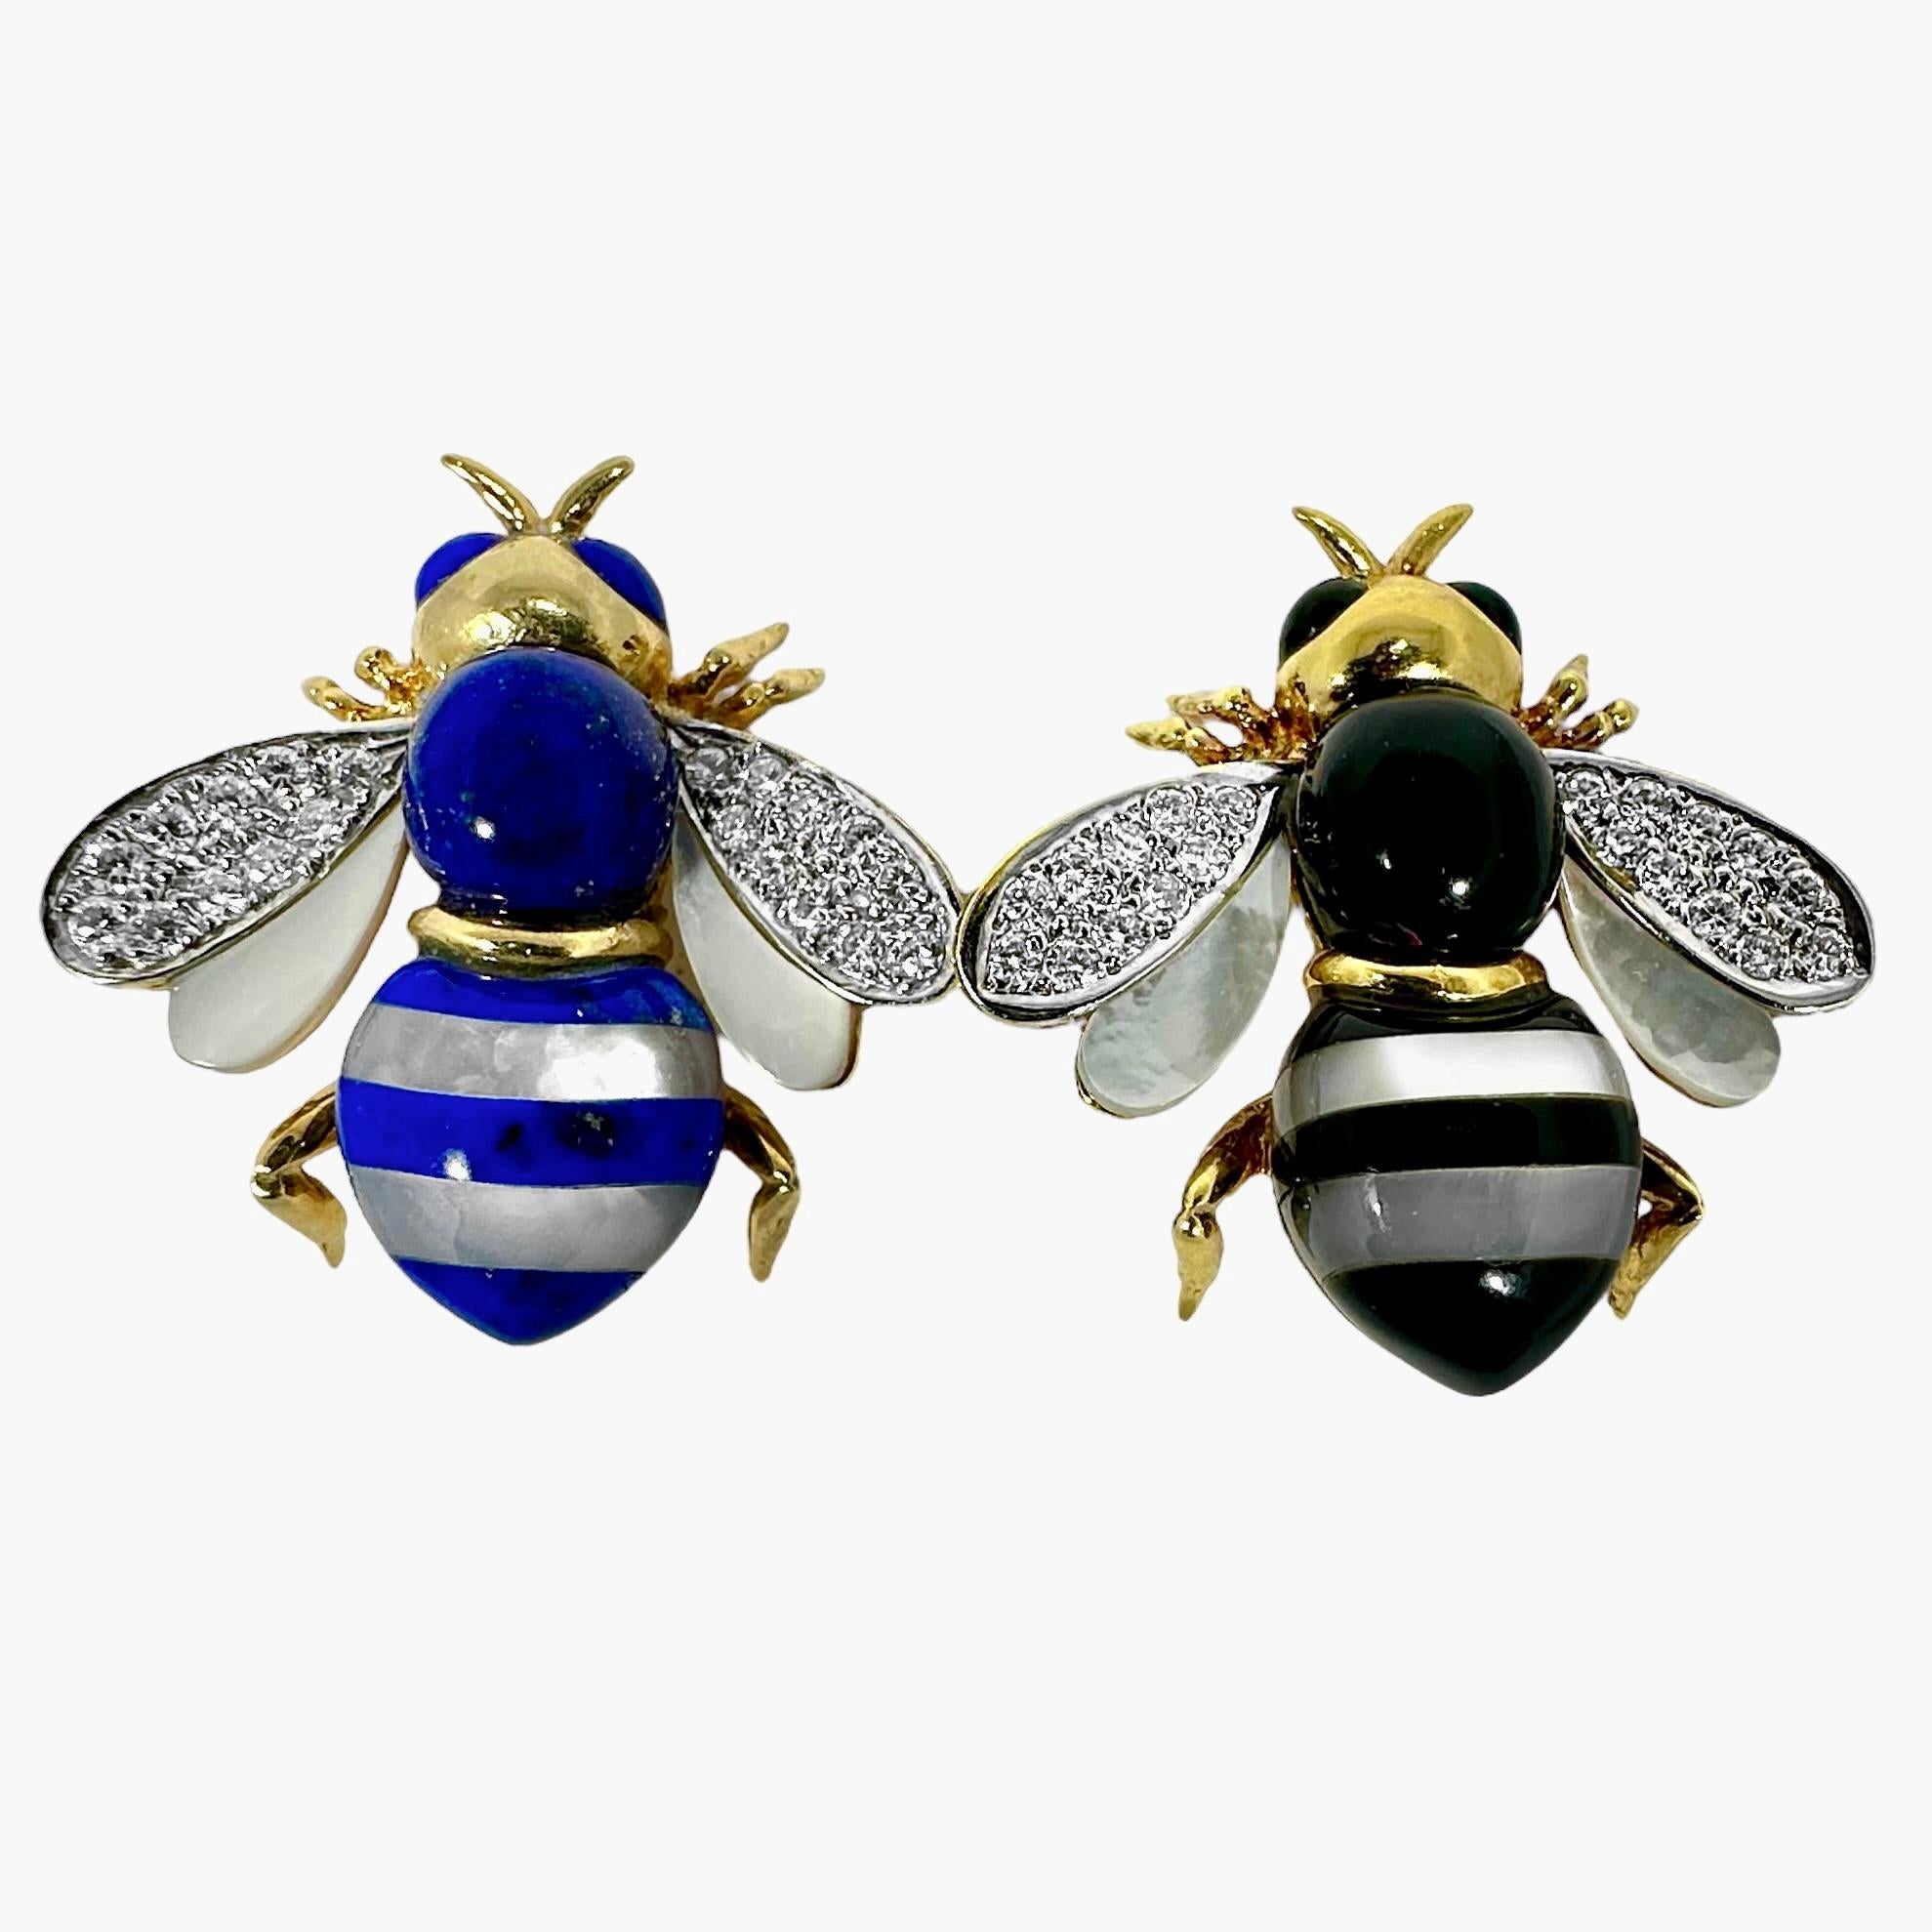 Brilliant Cut Pair of Stone Inlay Bumble Bee Pins in Gold w/ Diamond Wings by Asch Grossbardt For Sale